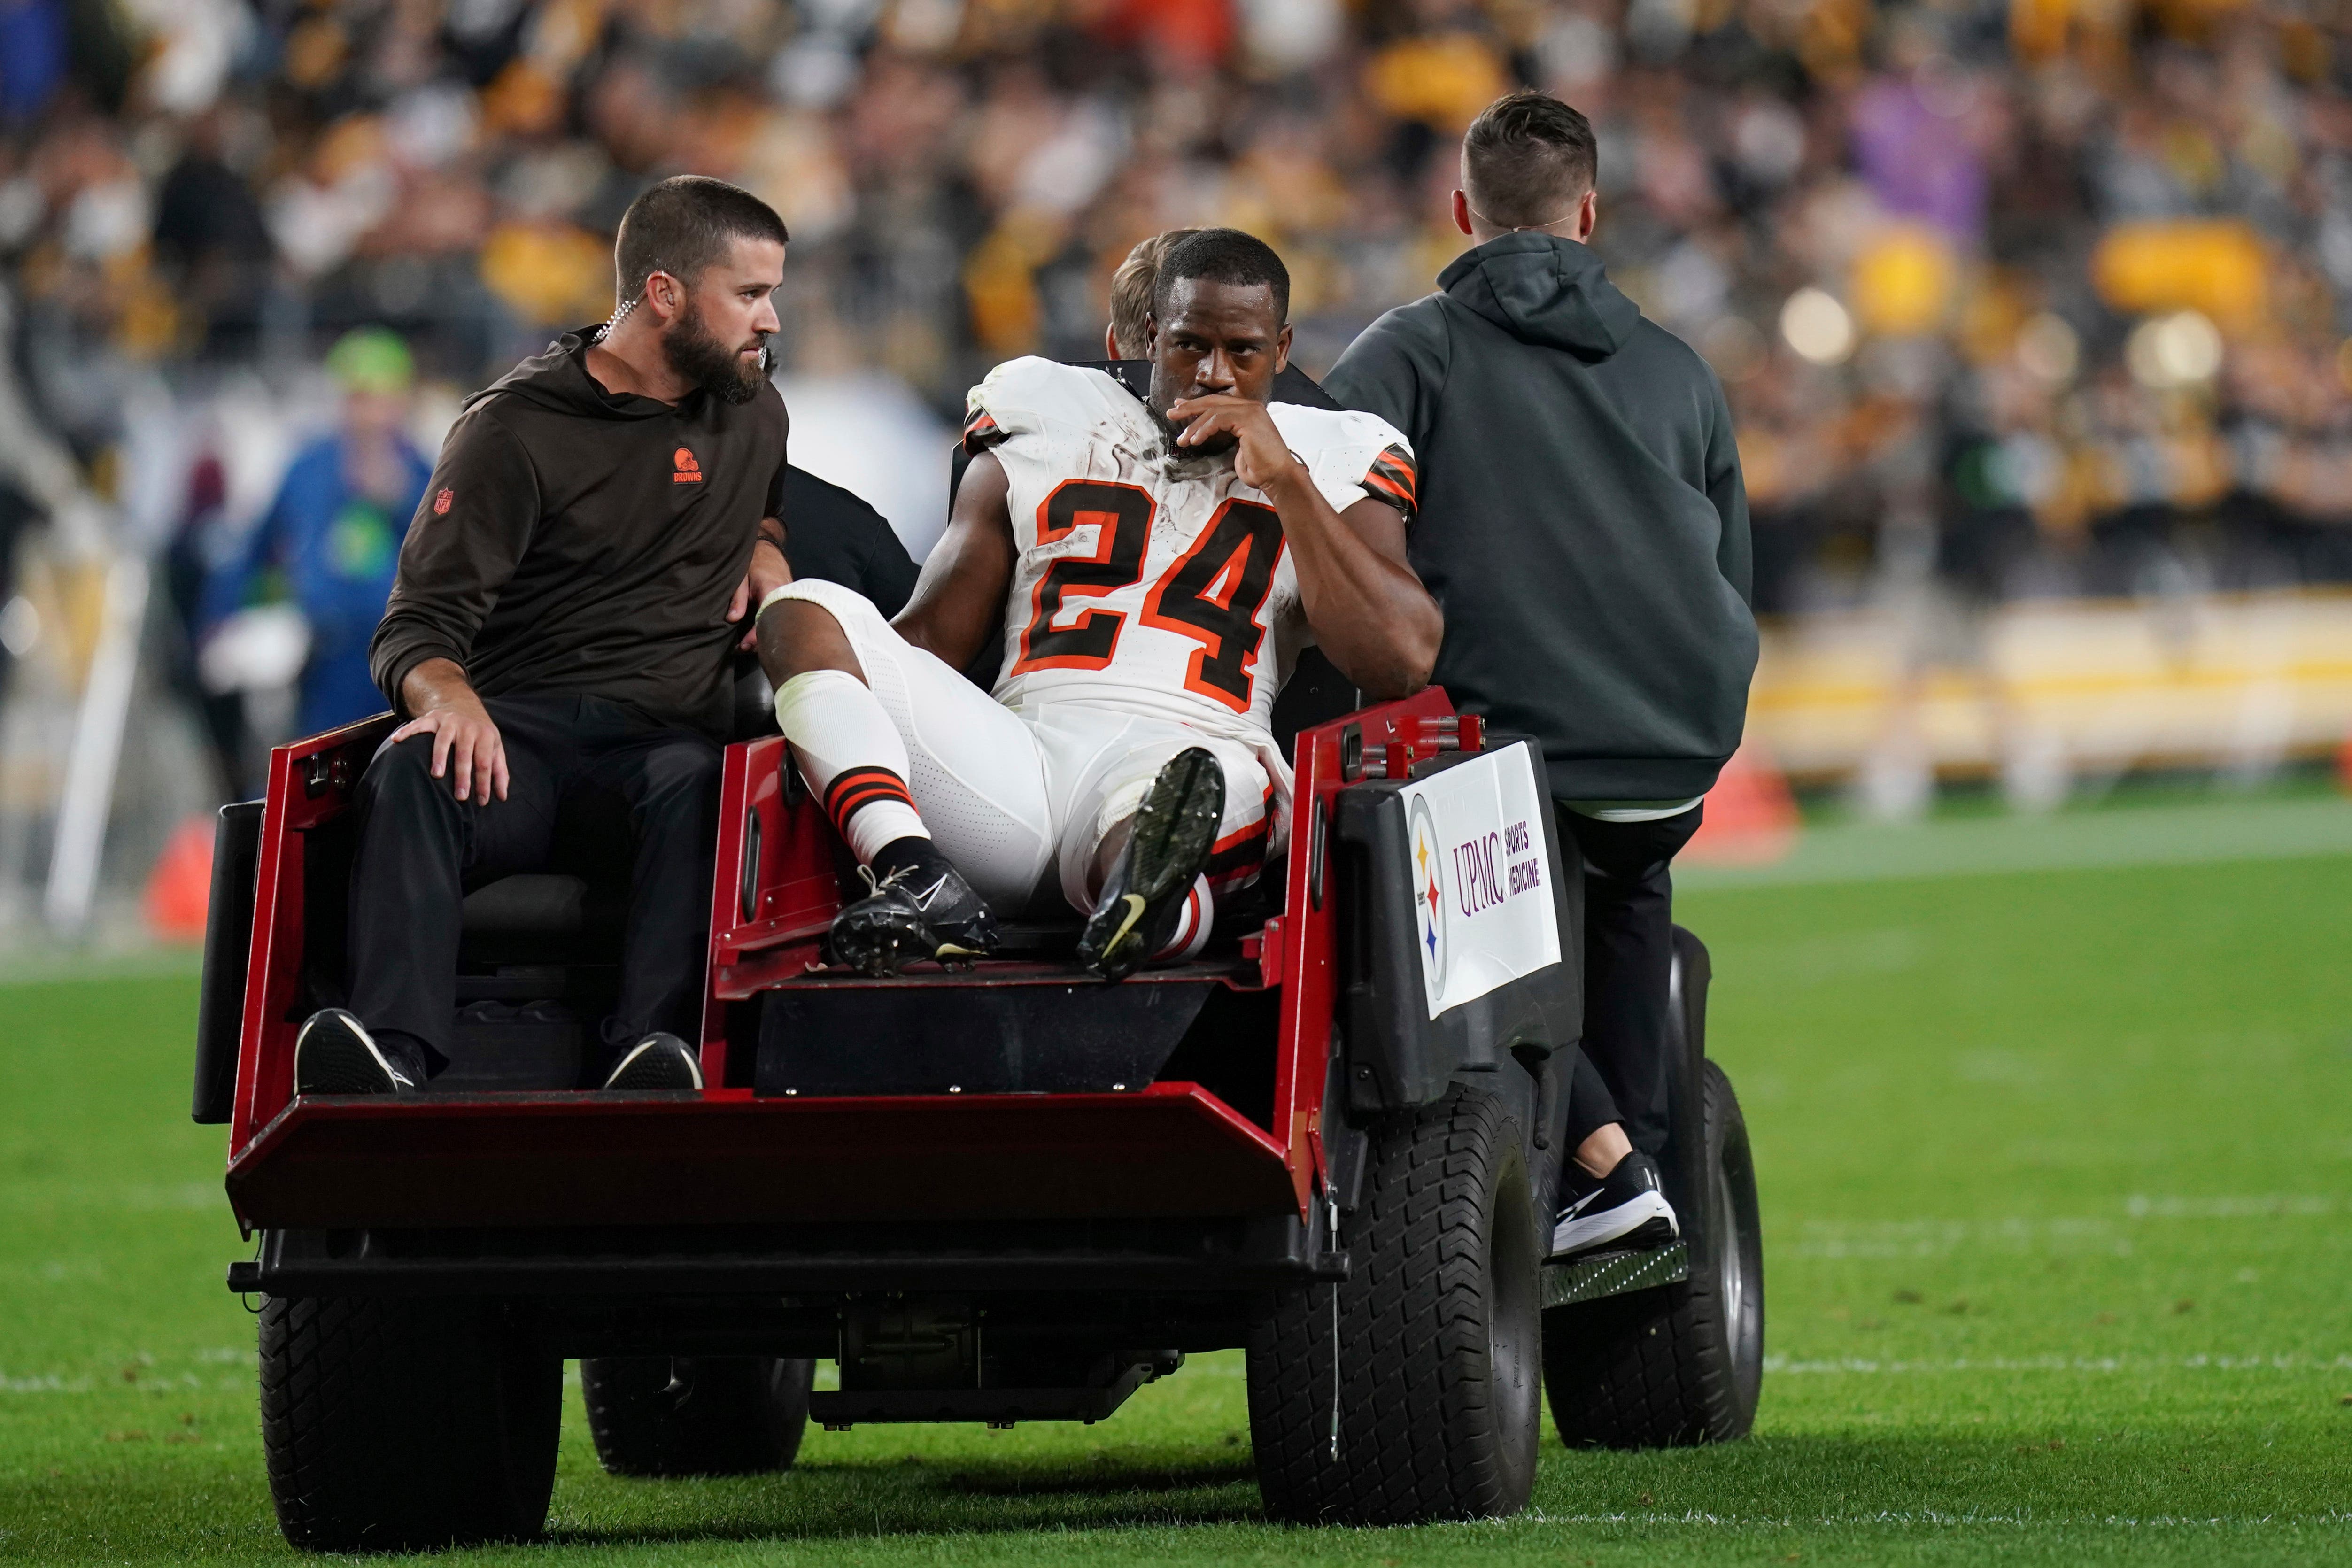 Cleveland Browns running back Nick Chubb is carried off the field with an injury (Matt Freed/AP)